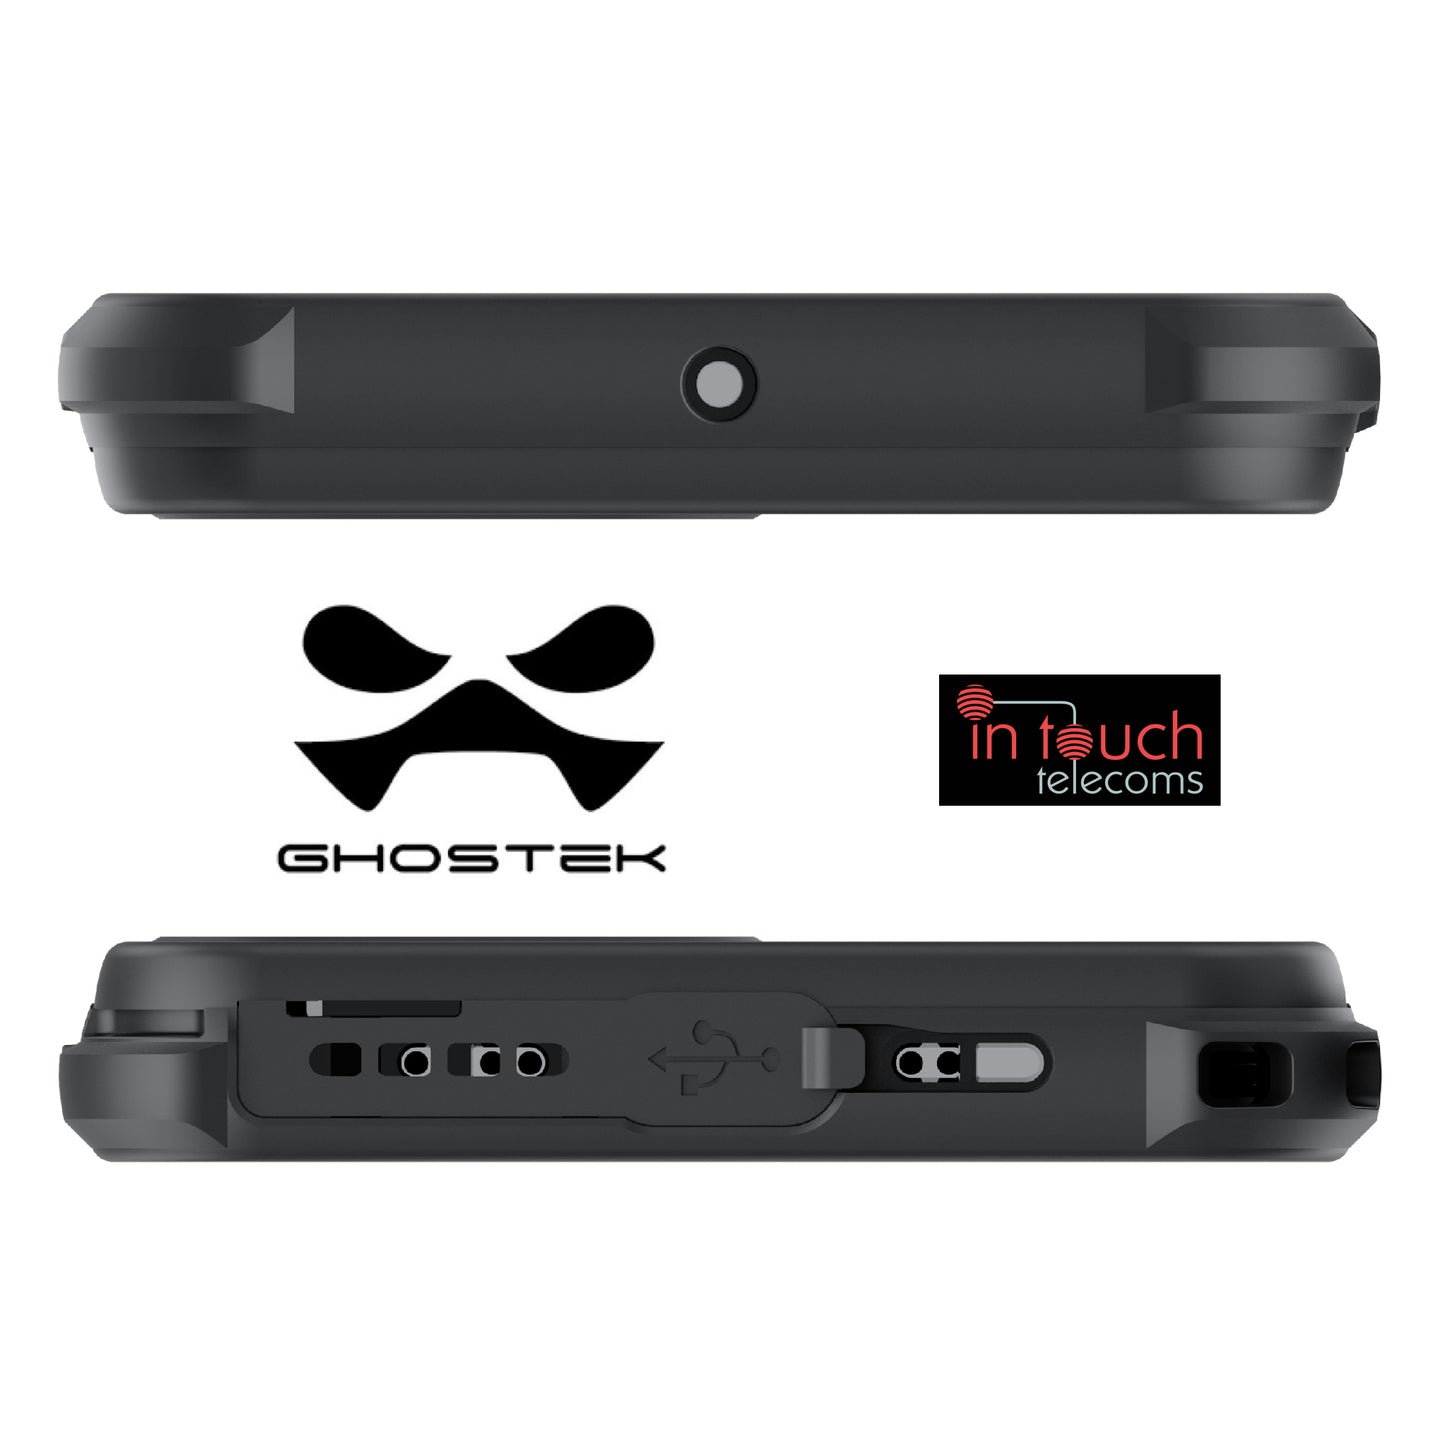 Ghostek Nautical 3 Case for iPhone 12 Pro 6.1 | Military Grade 360°